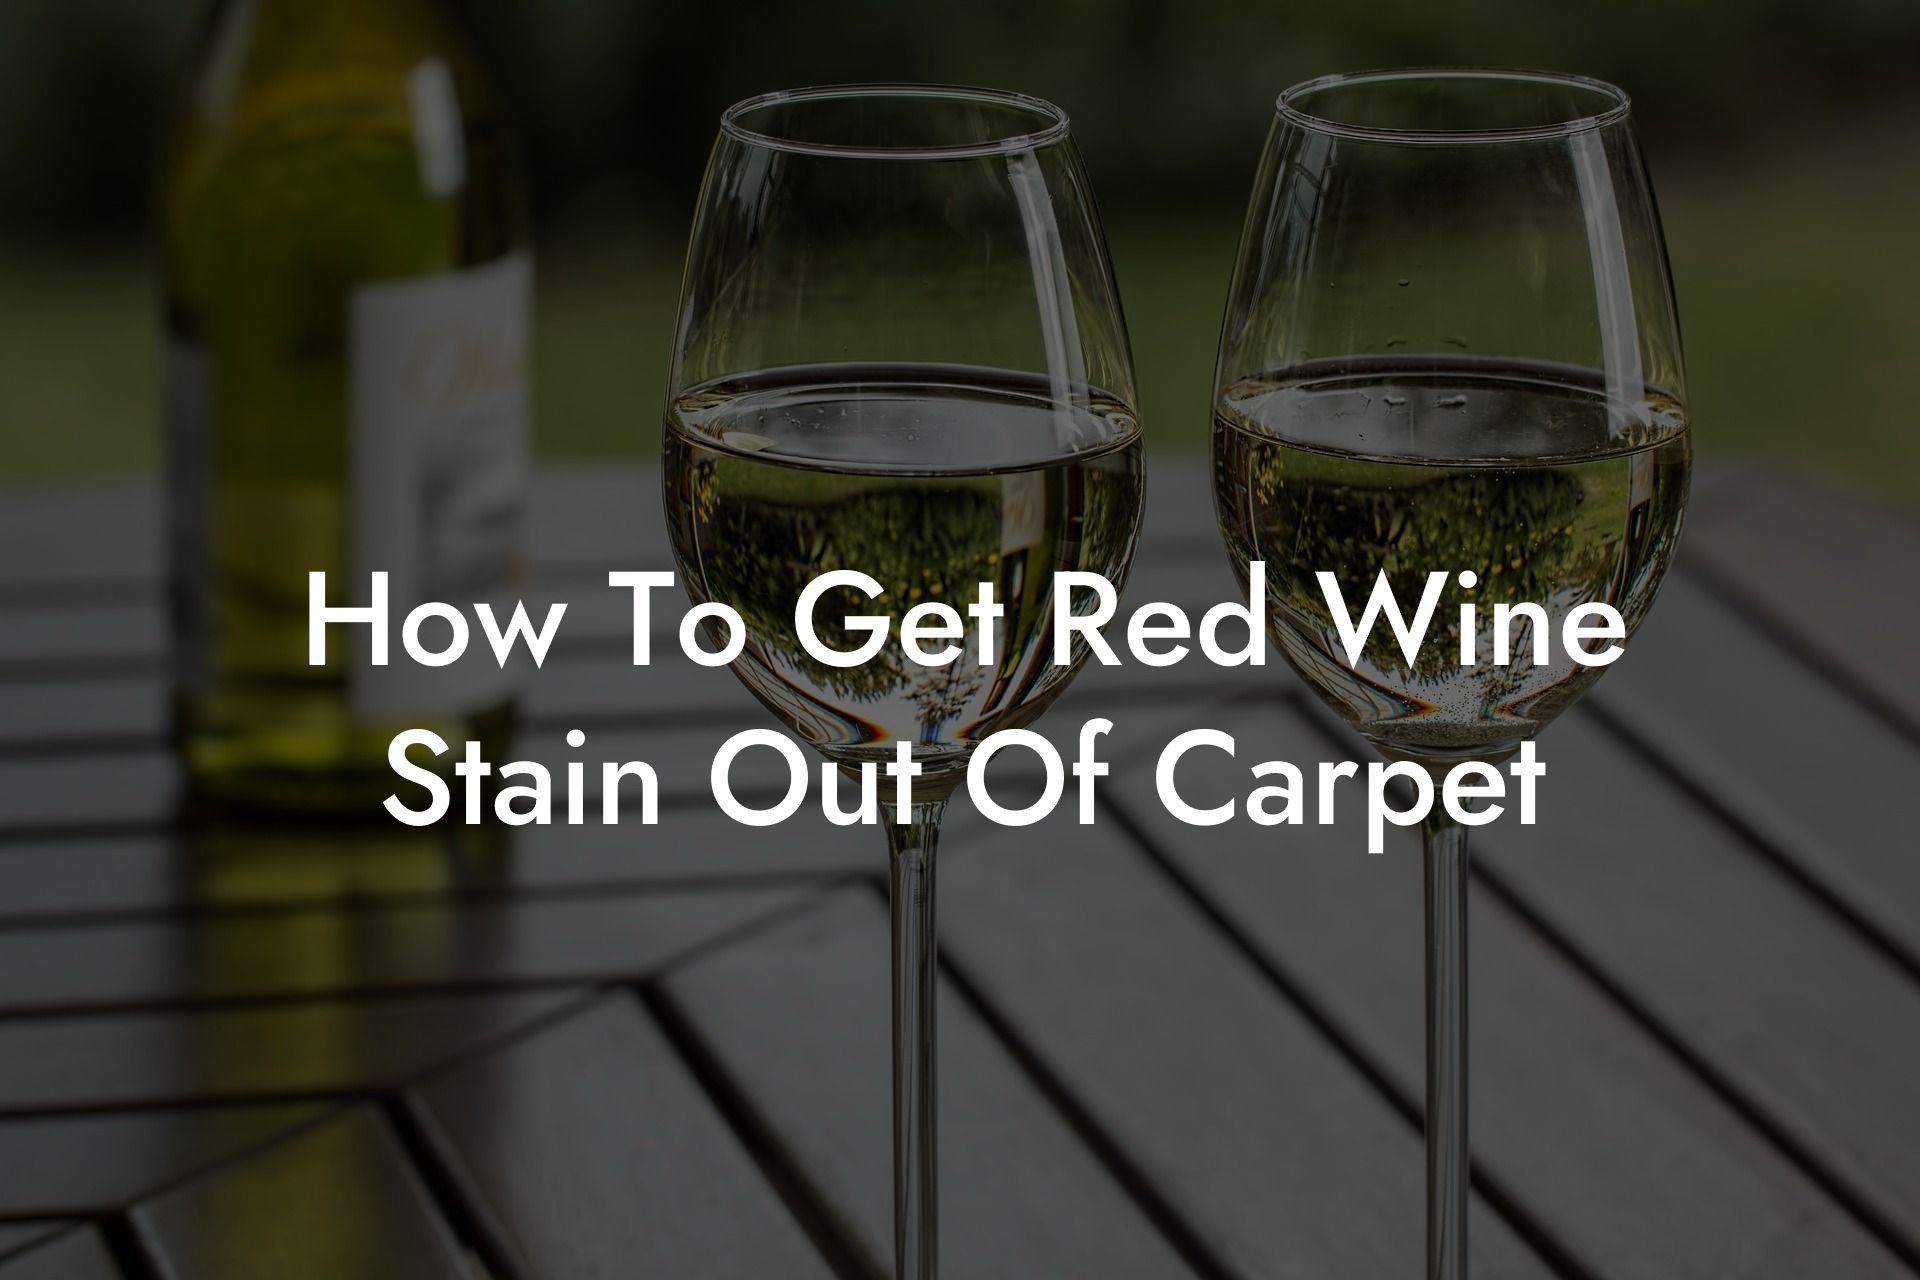 How To Get Red Wine Stain Out Of Carpet